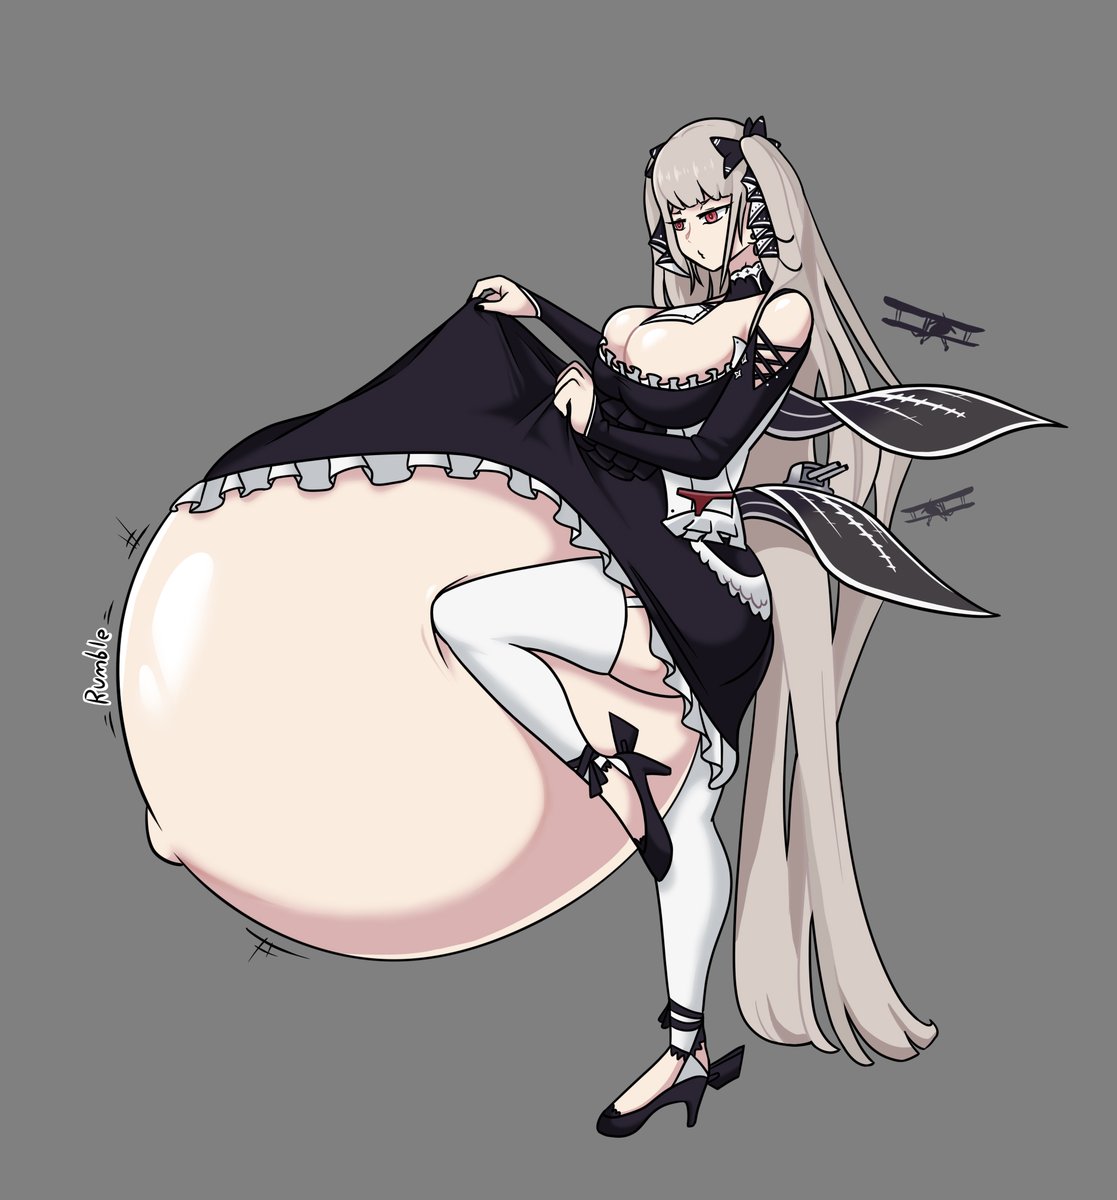 HMS Fomridable, from Az*r L*ne for @EsseggsAlt vore is so hot maaan, also included a round alt just in case~ P.D. I havent played the game, Ill just think this is canon